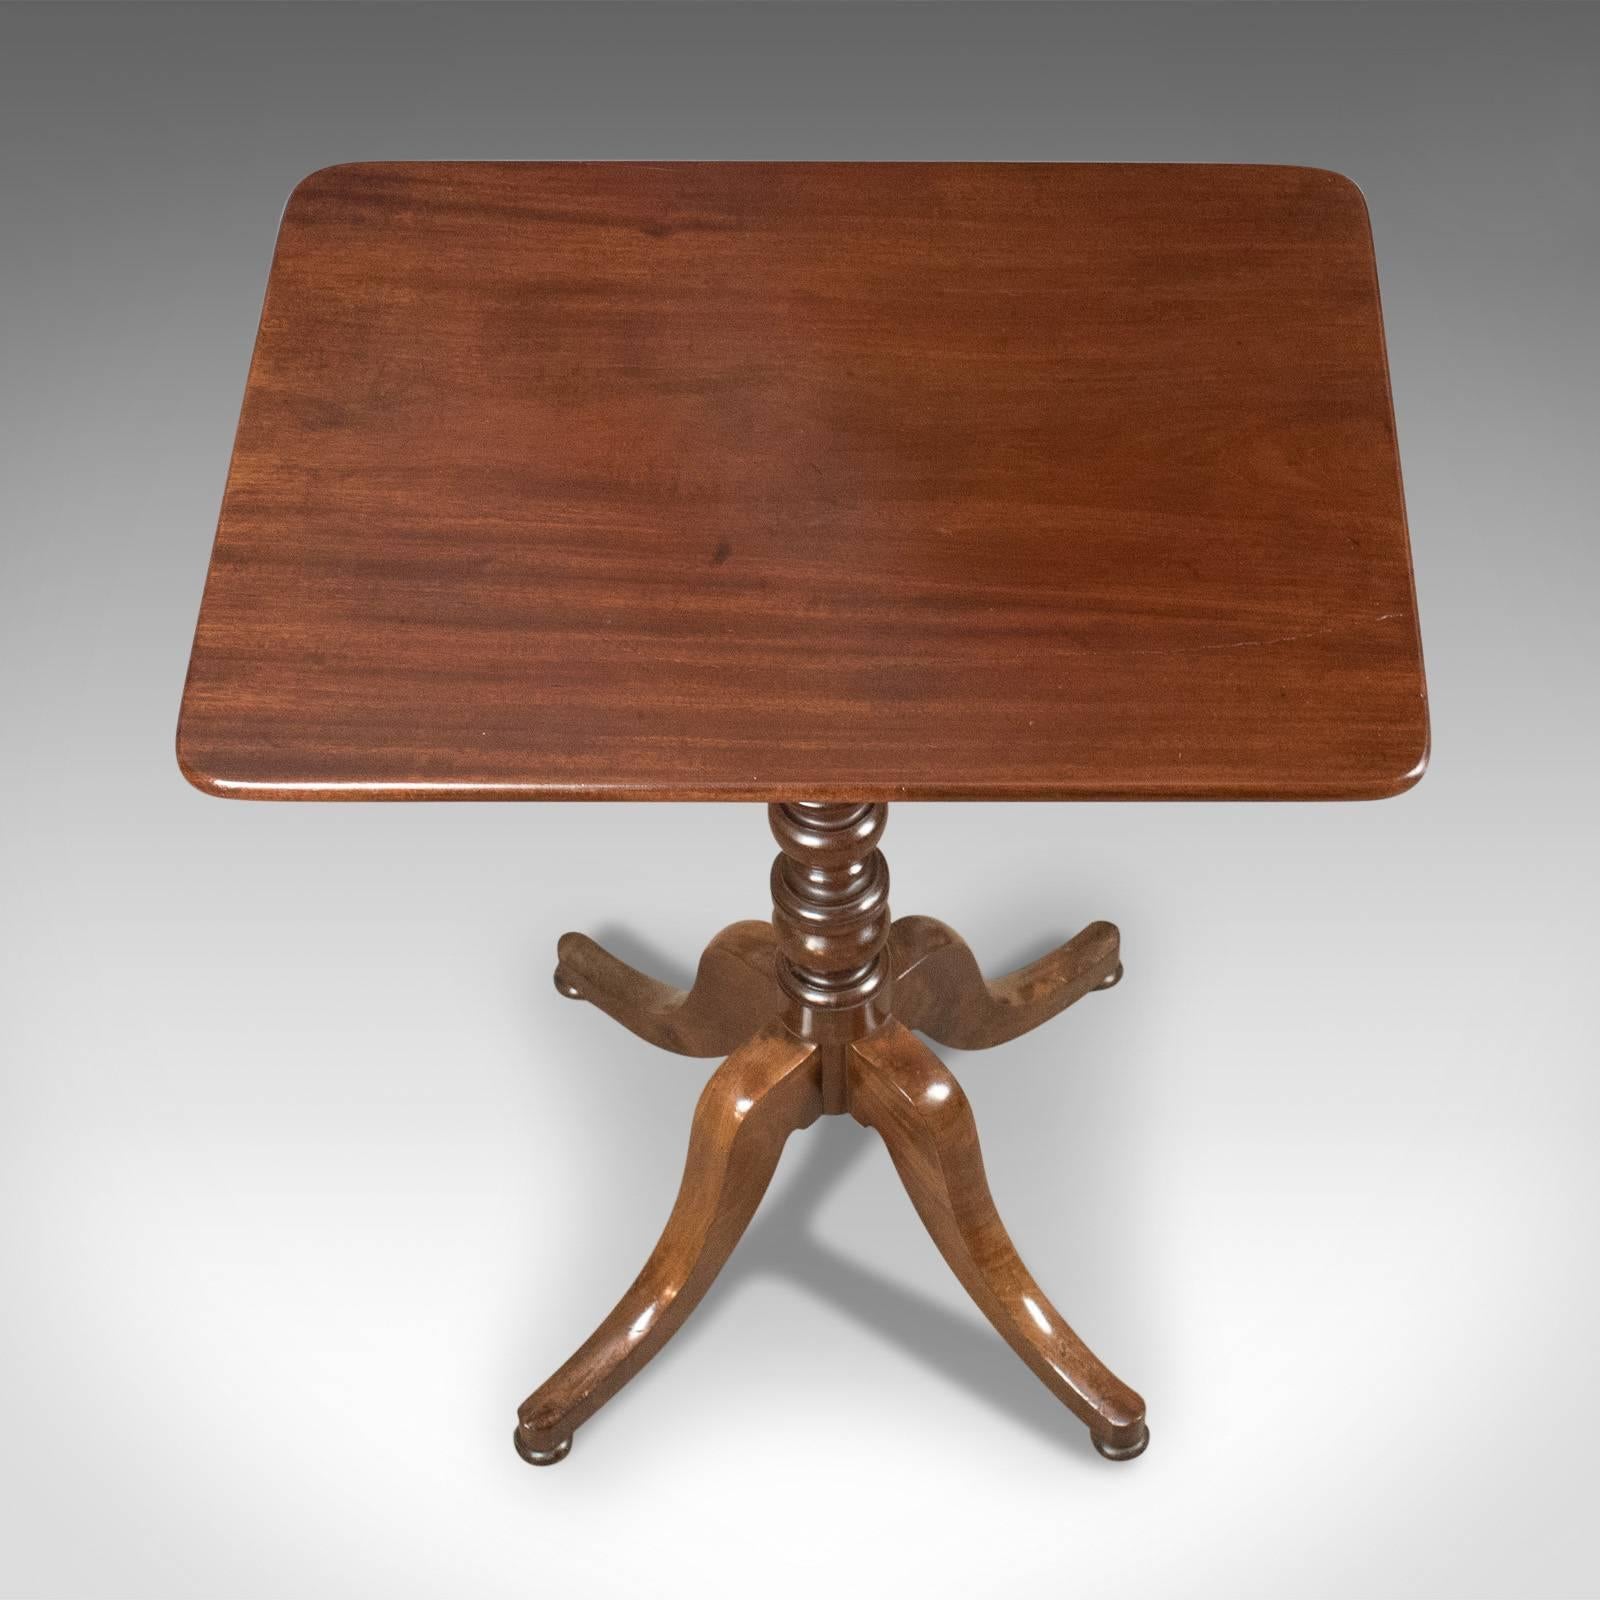 This is an antique wine table in mahogany from the end of the Victorian era. An English side table dating to circa 1900.

Good proportions and color
Tabletop displaying well and featuring subtle rounded corners
Raised on a ring turned stem
Over